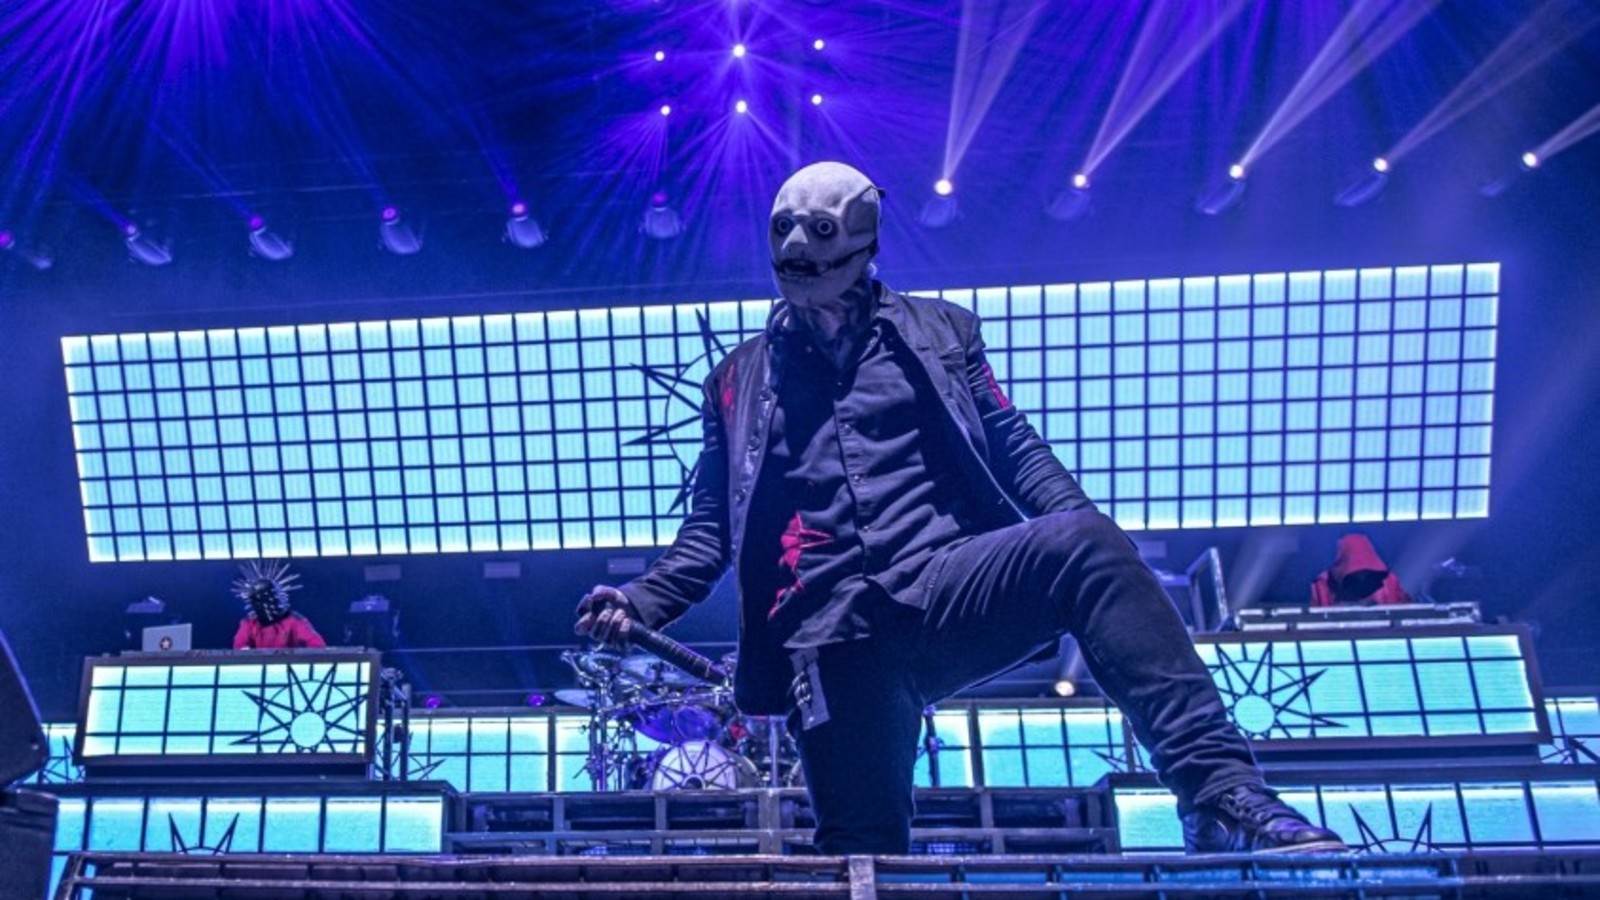 Hear Slipknot's New Album 'We Are Not Your Kind' Now